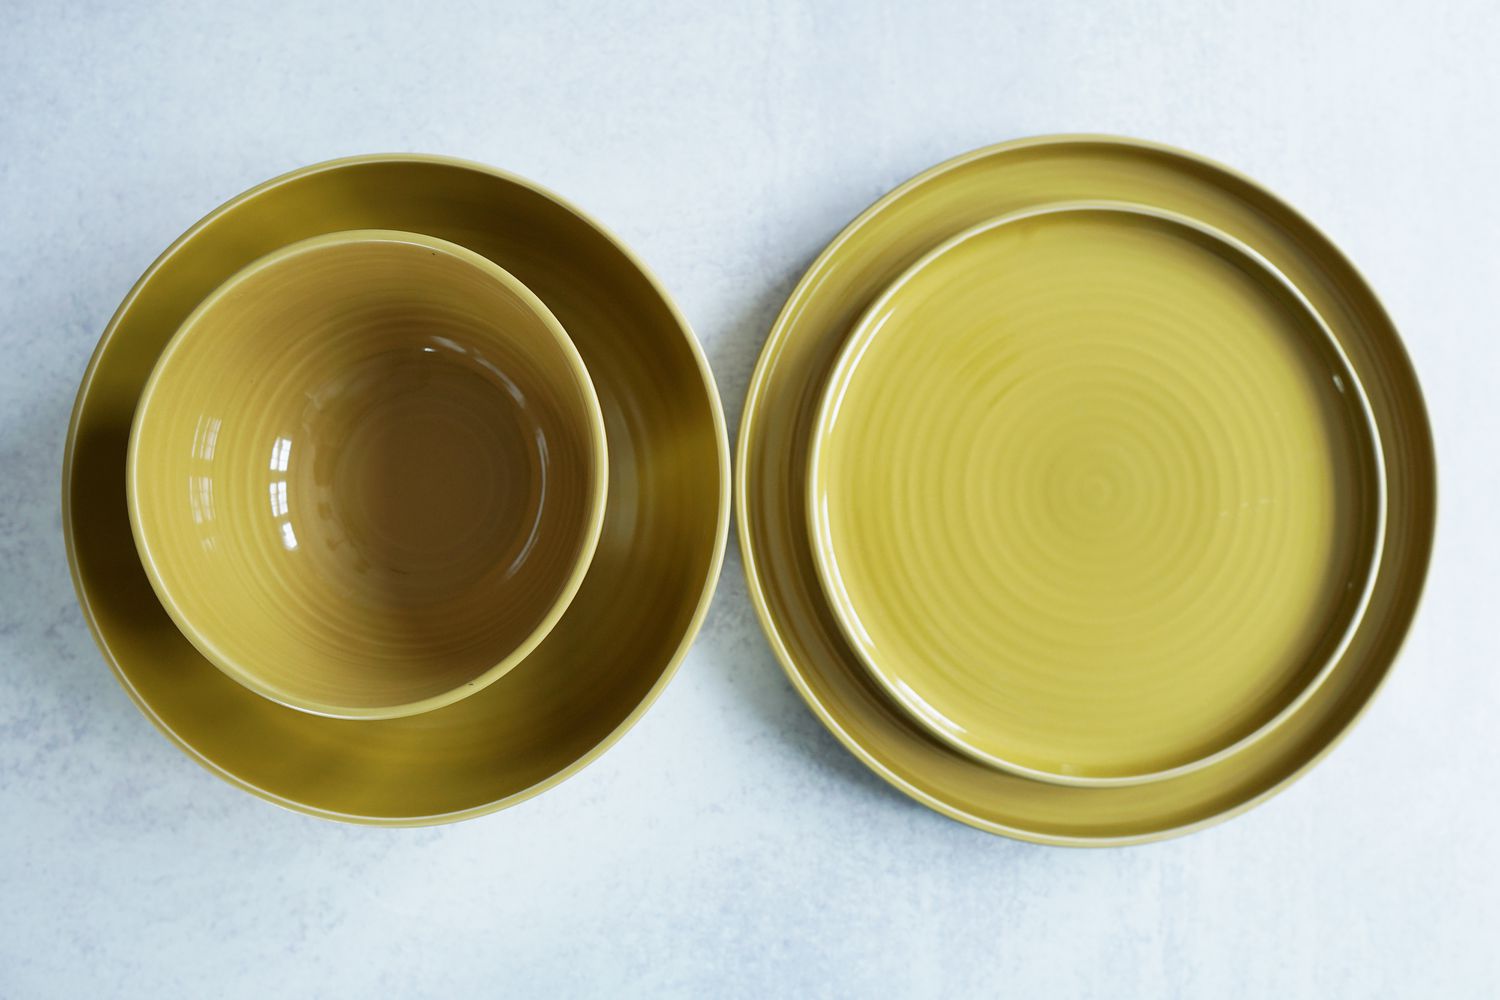 Two yellow plates and two bowls on a grey surface